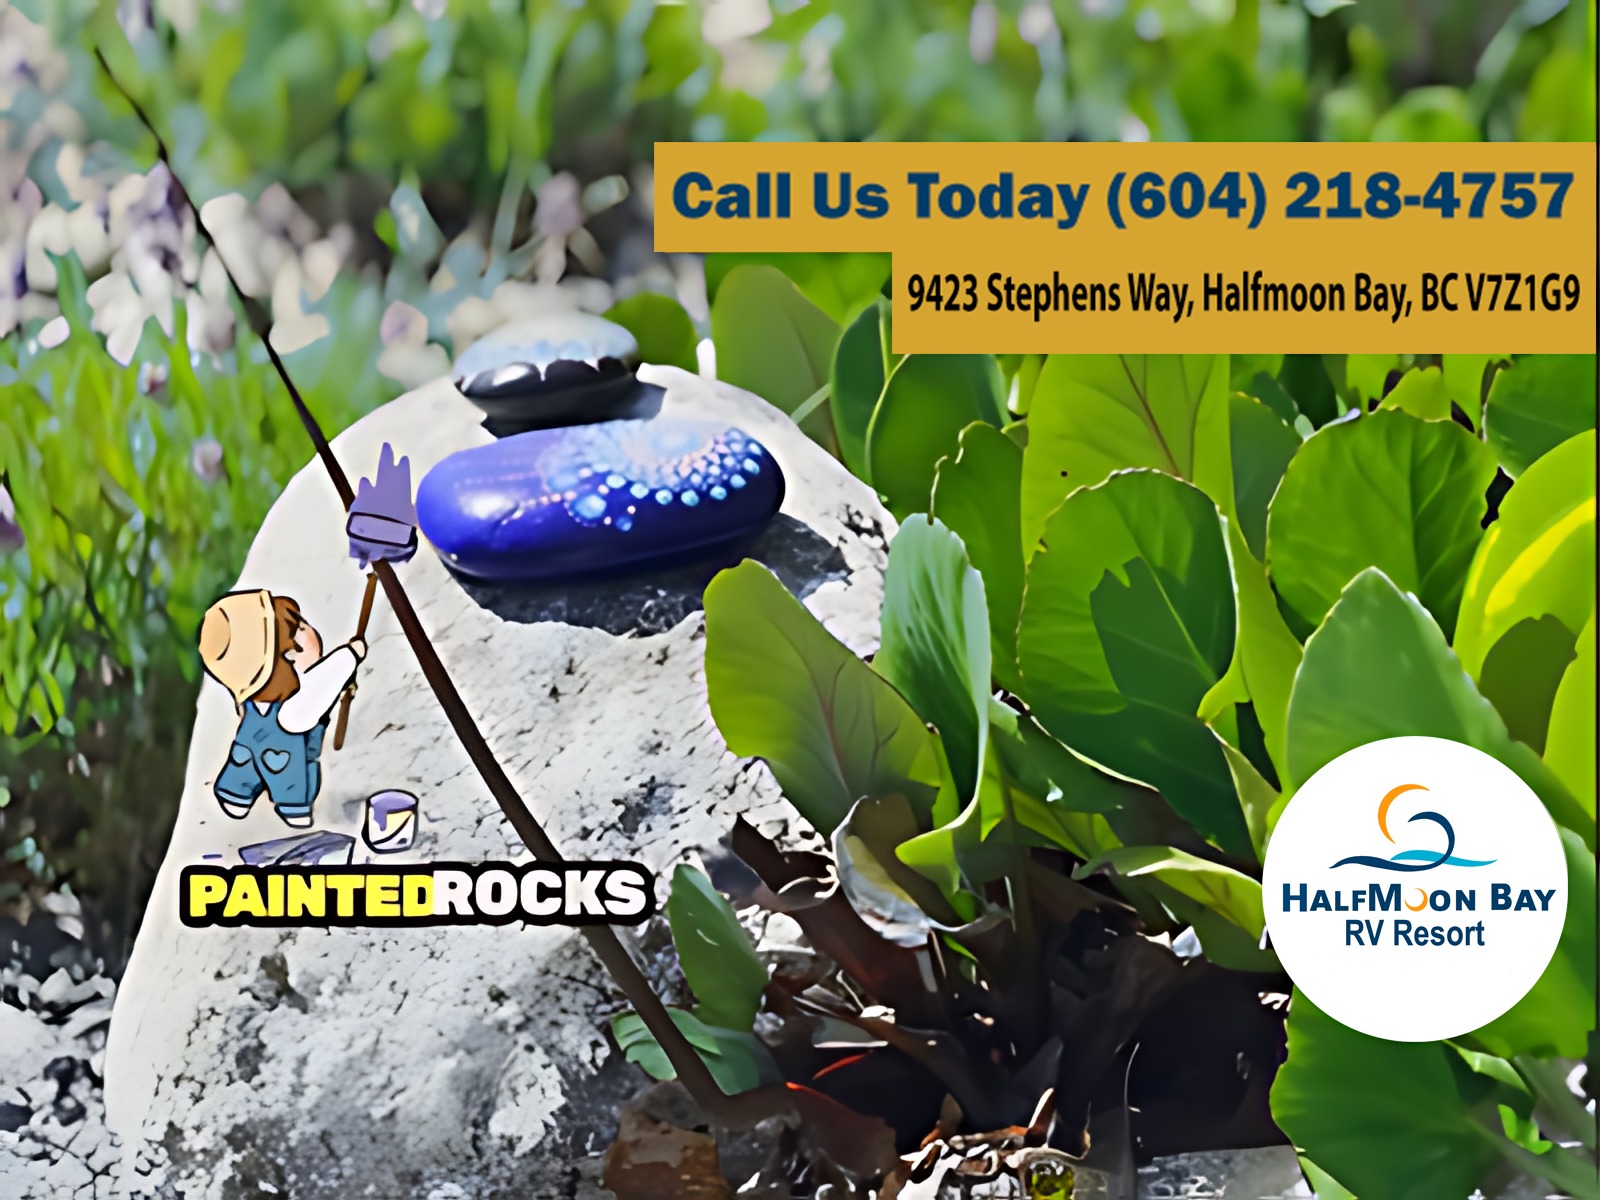 Decorating Your Place at Halfmoon Bay RV Resort with Painted Rocks